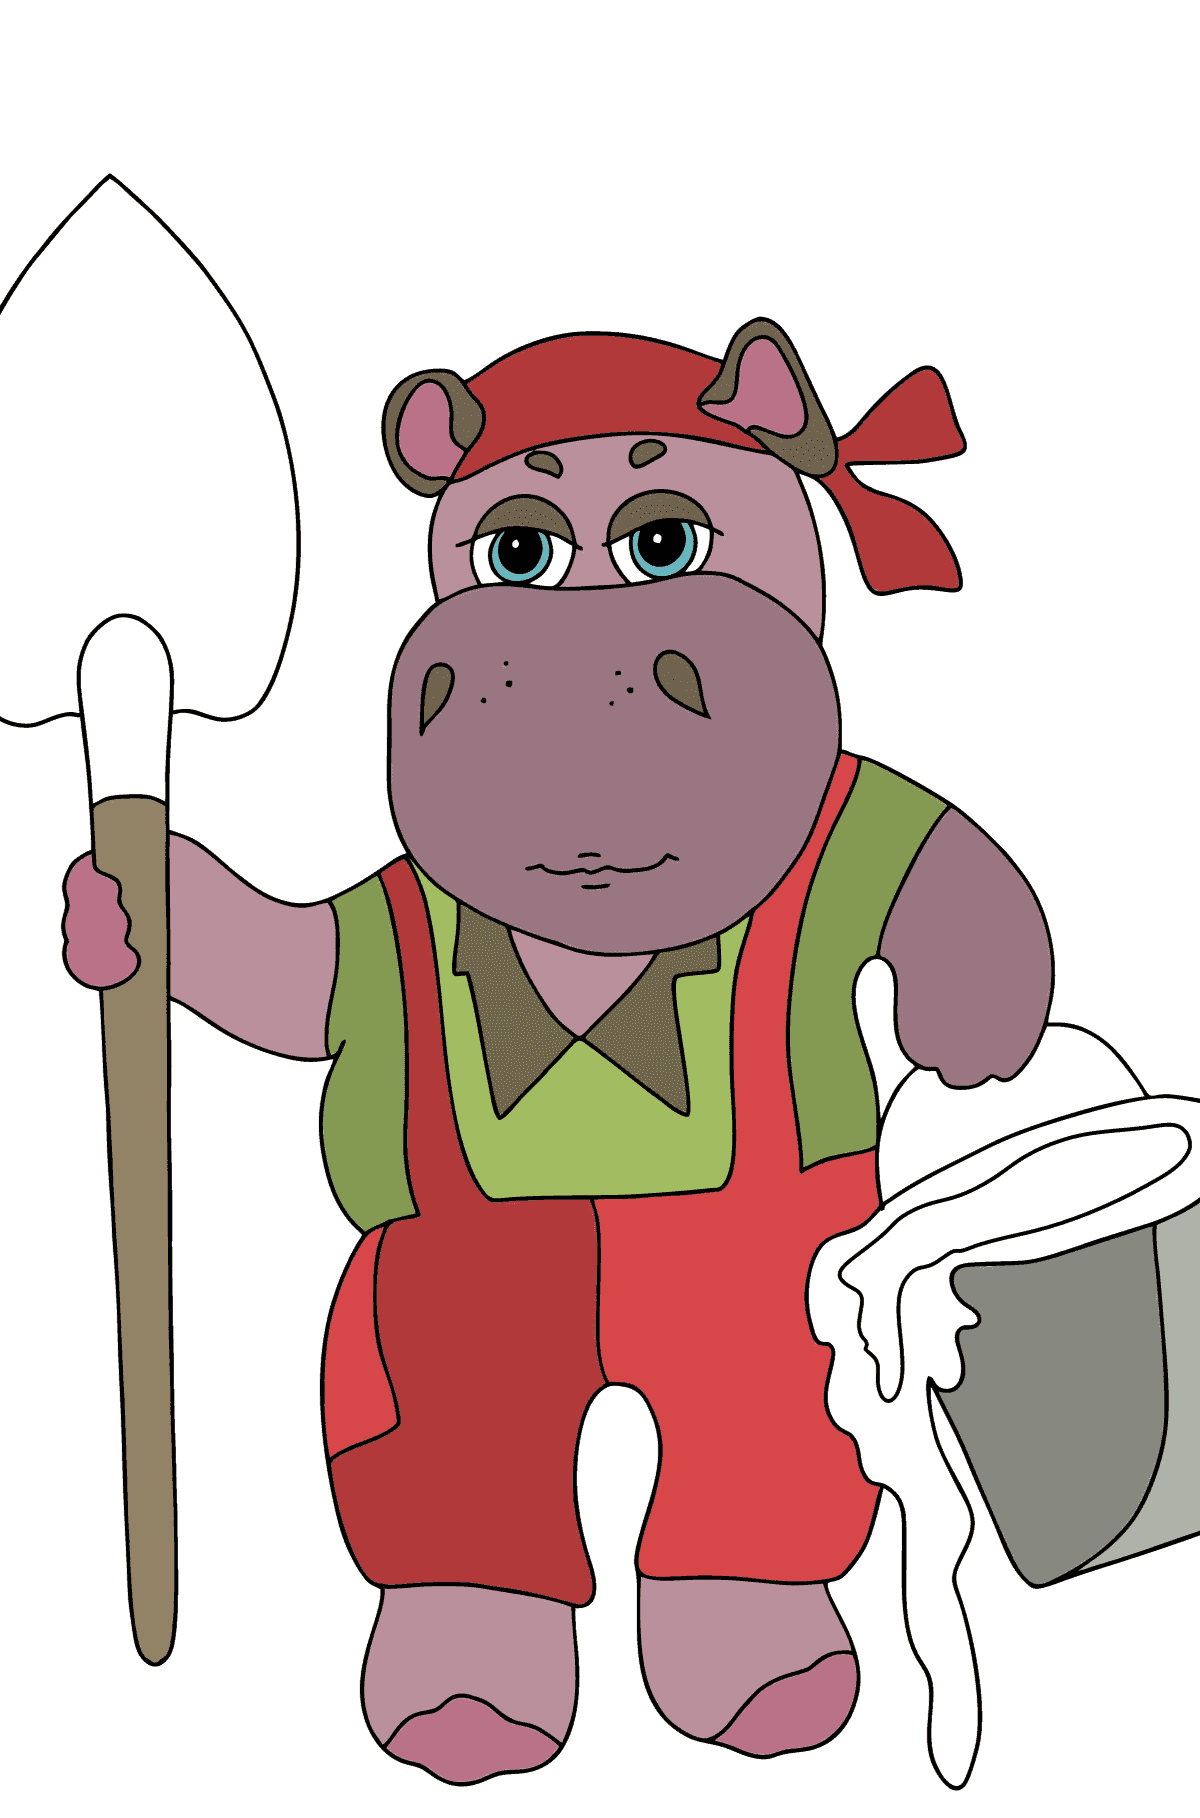 Hippopotam in the garden coloring page - Coloring Pages for Kids